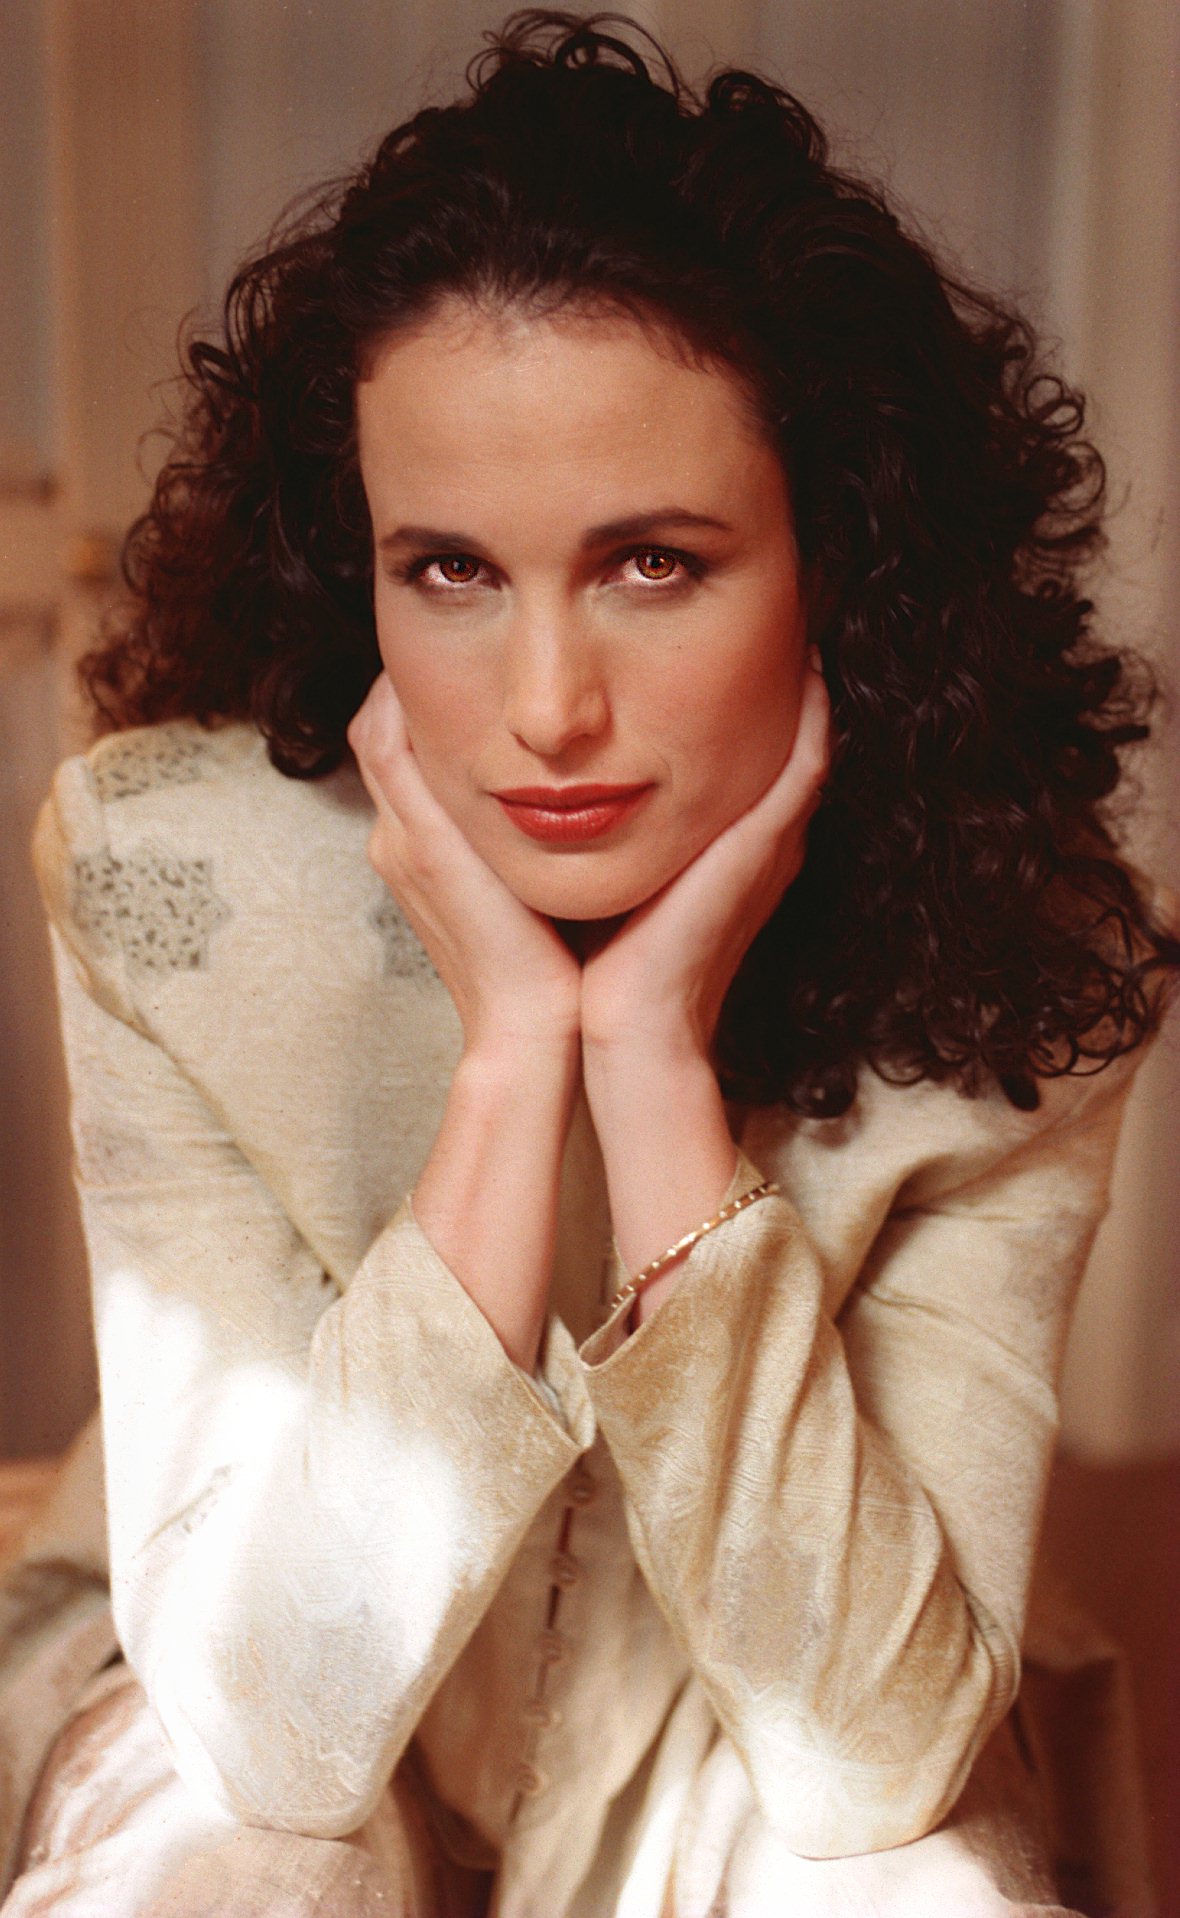 Andie MacDowell at the Four Seasons Hotel in Boston on September 11, 1995 | Source: Getty Images